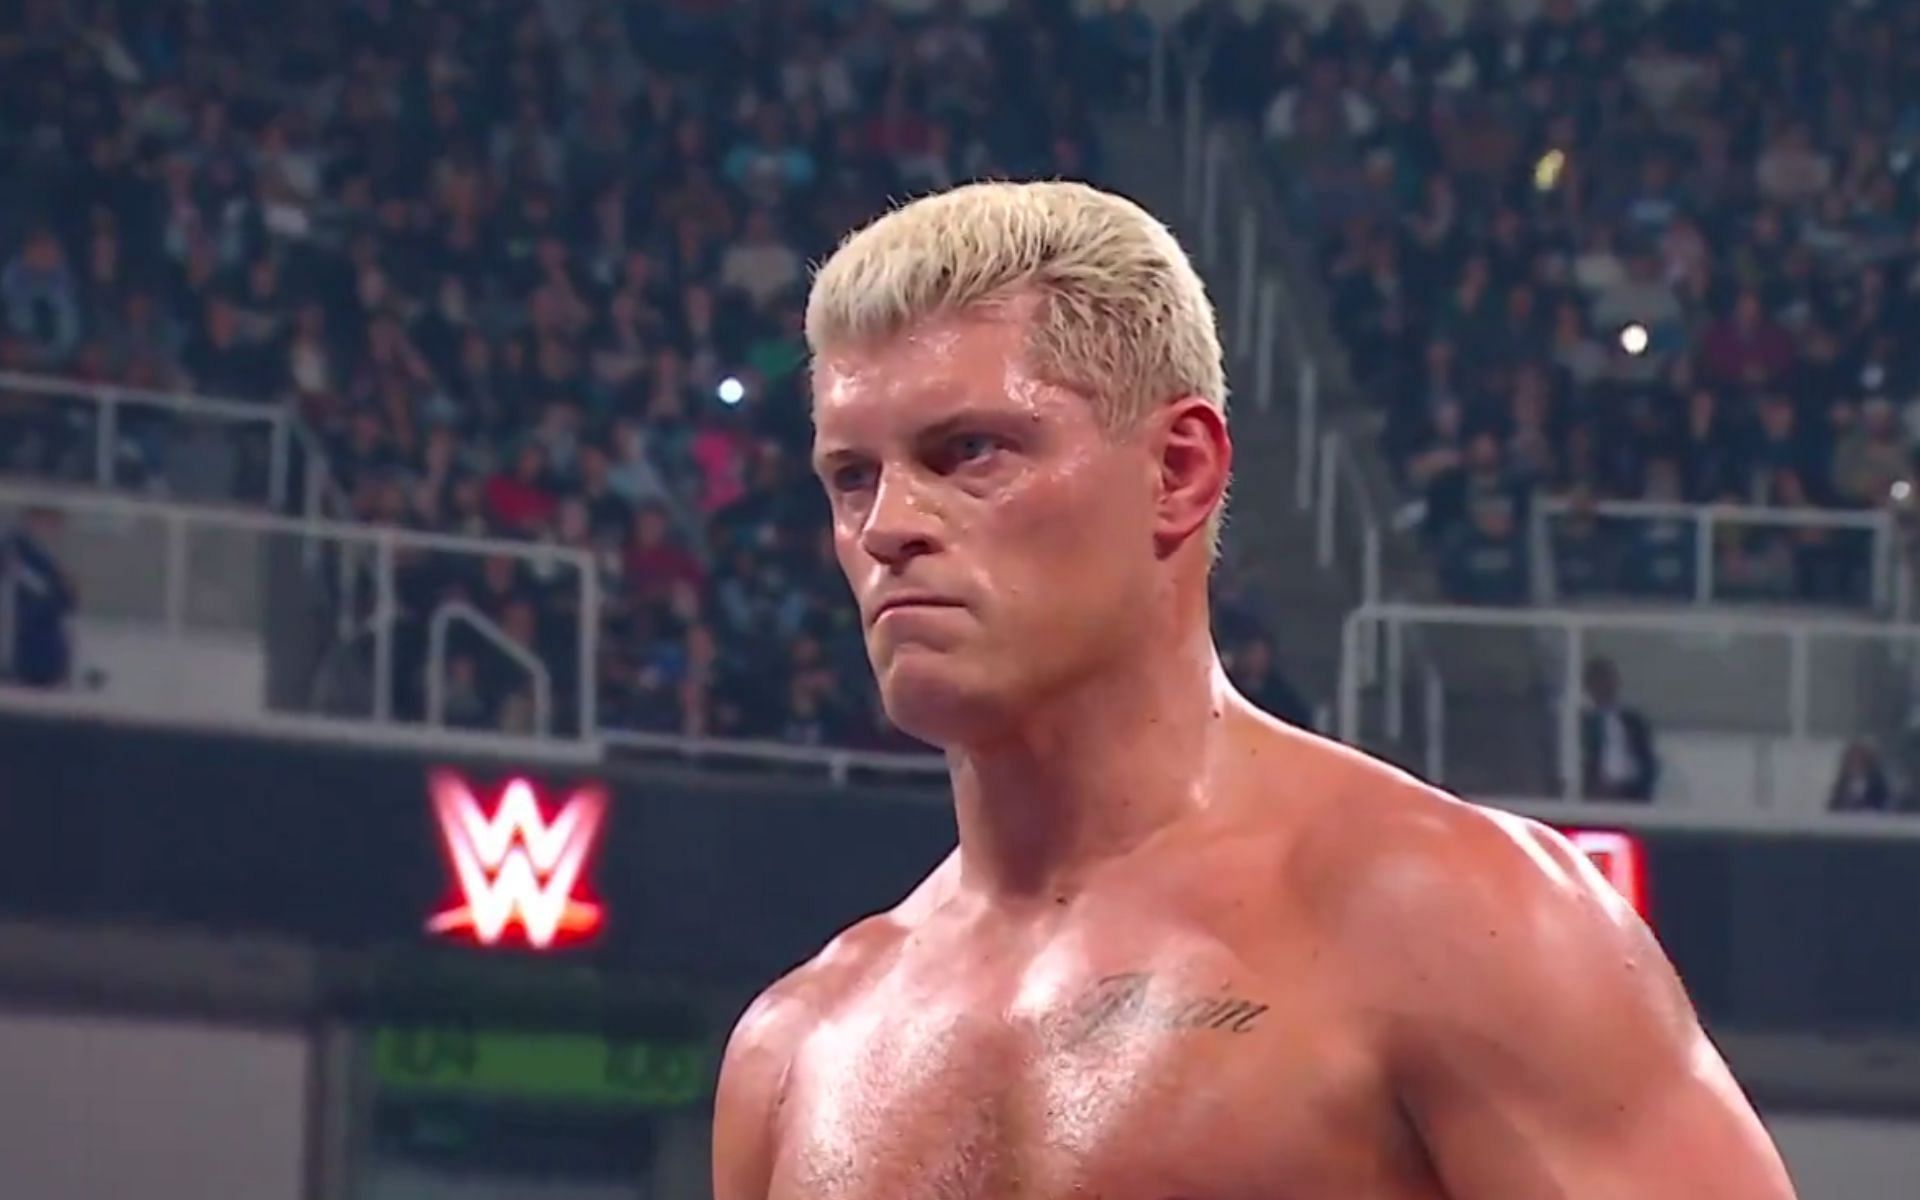 Cody was given a warning before RAW came to an end